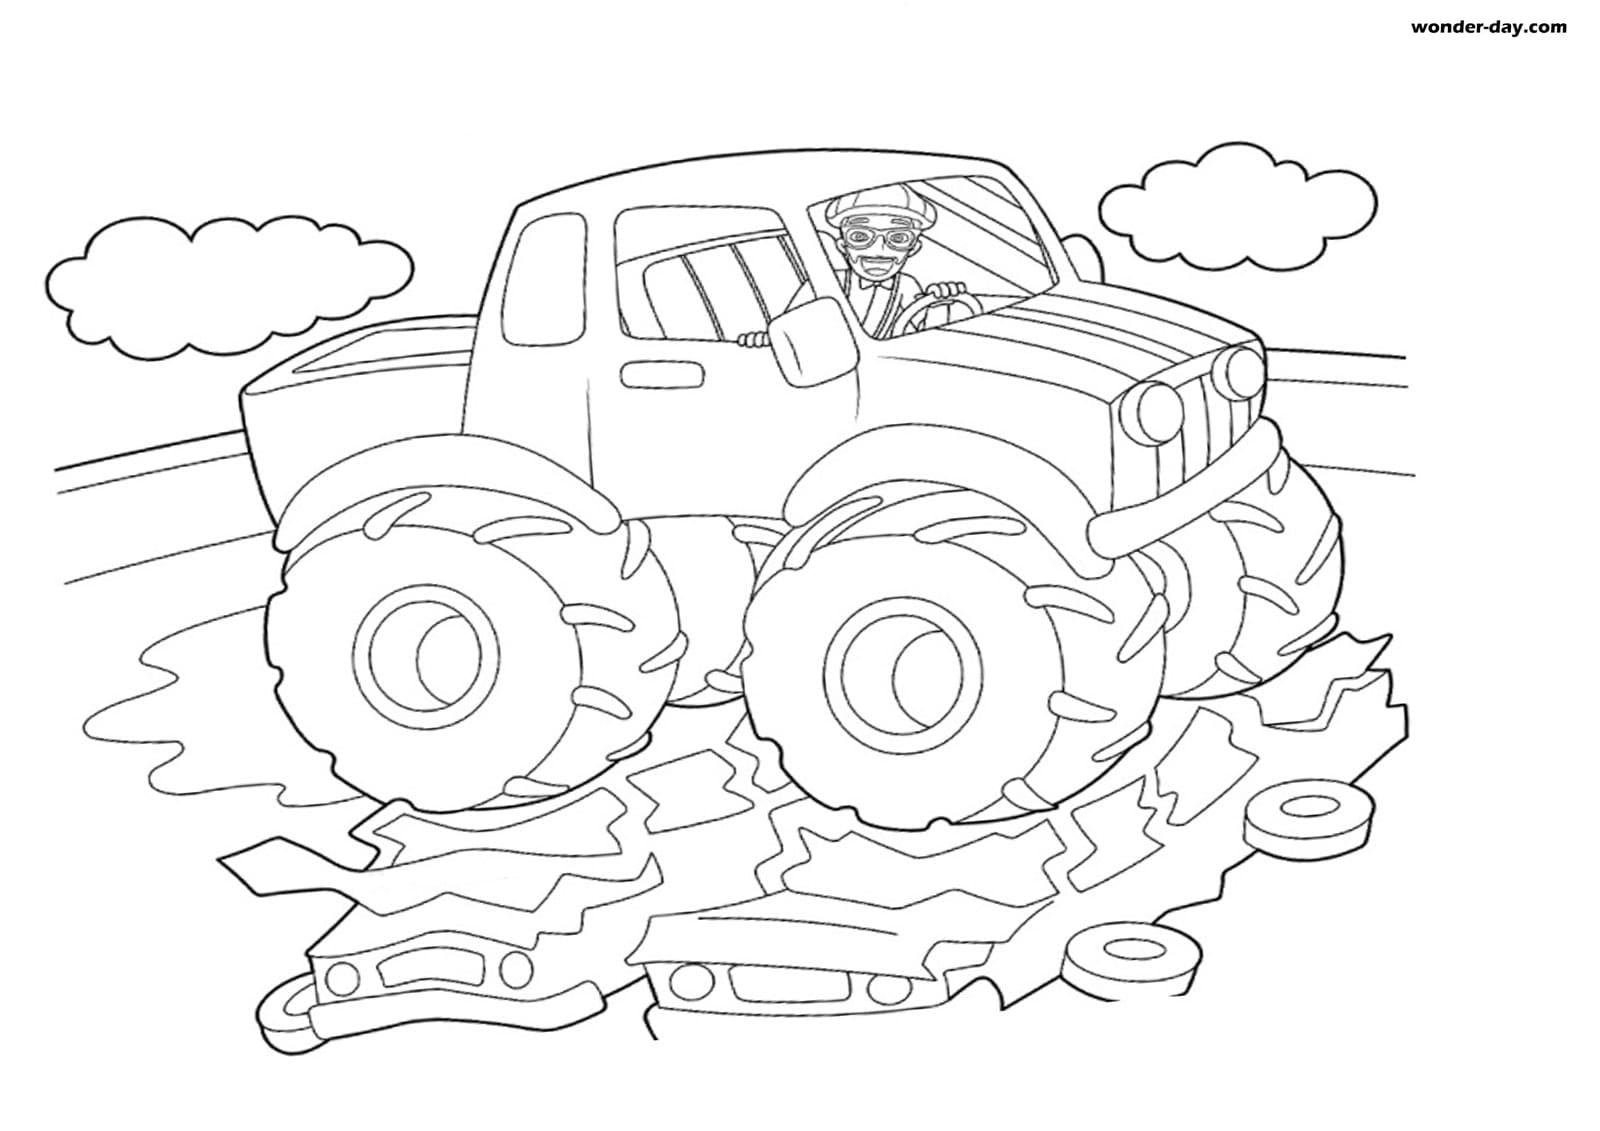 Free Printable Blippi Coloring Pages For Kids | WONDER DAY — Coloring